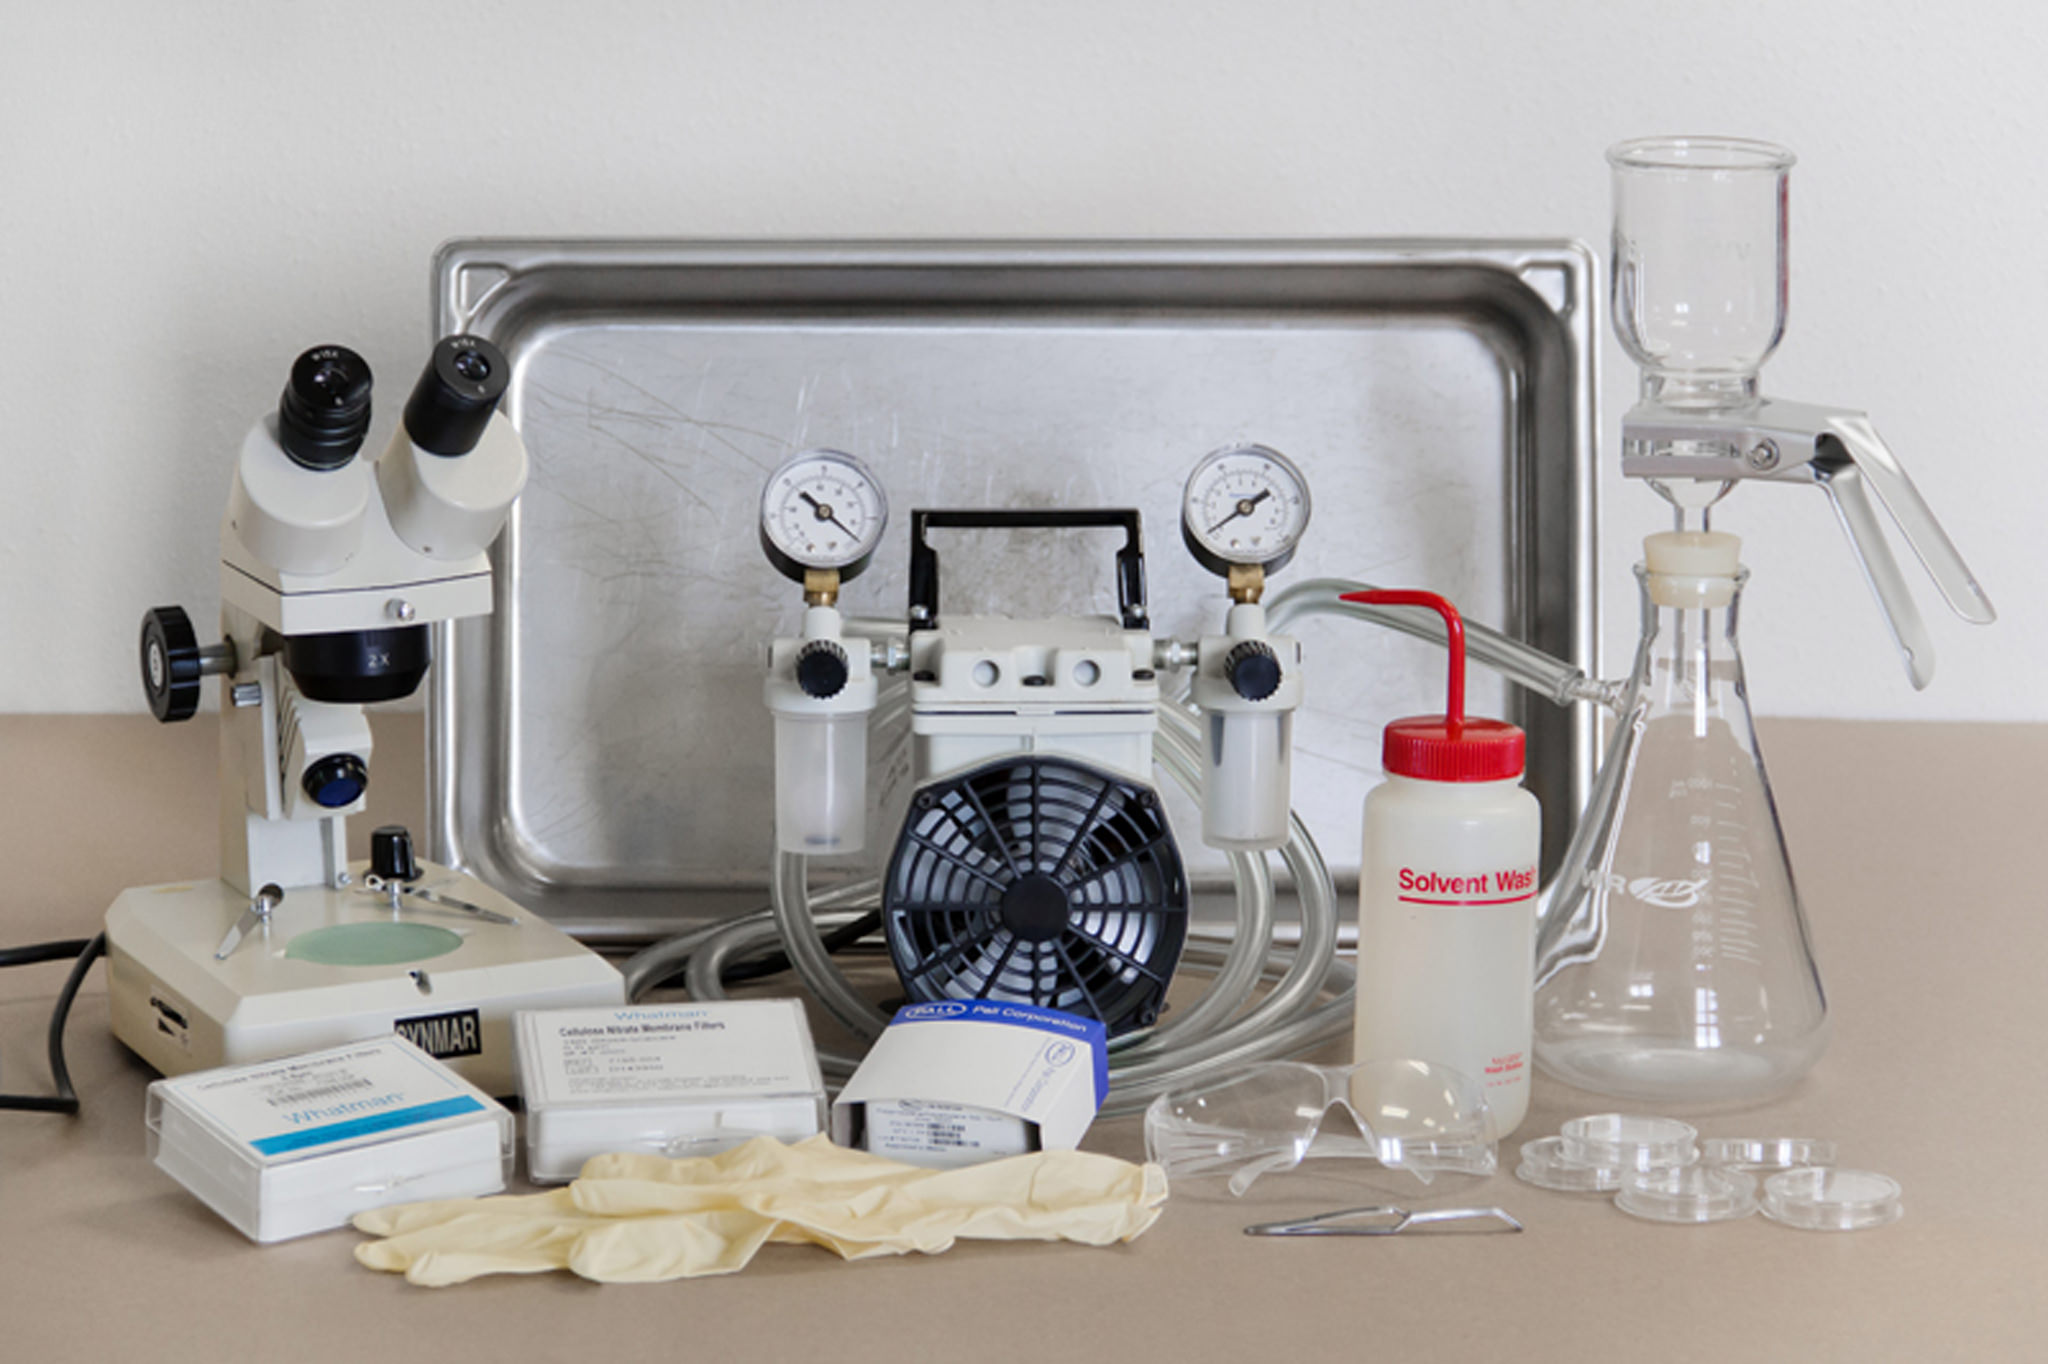 Cleanliness Testing Kit Components